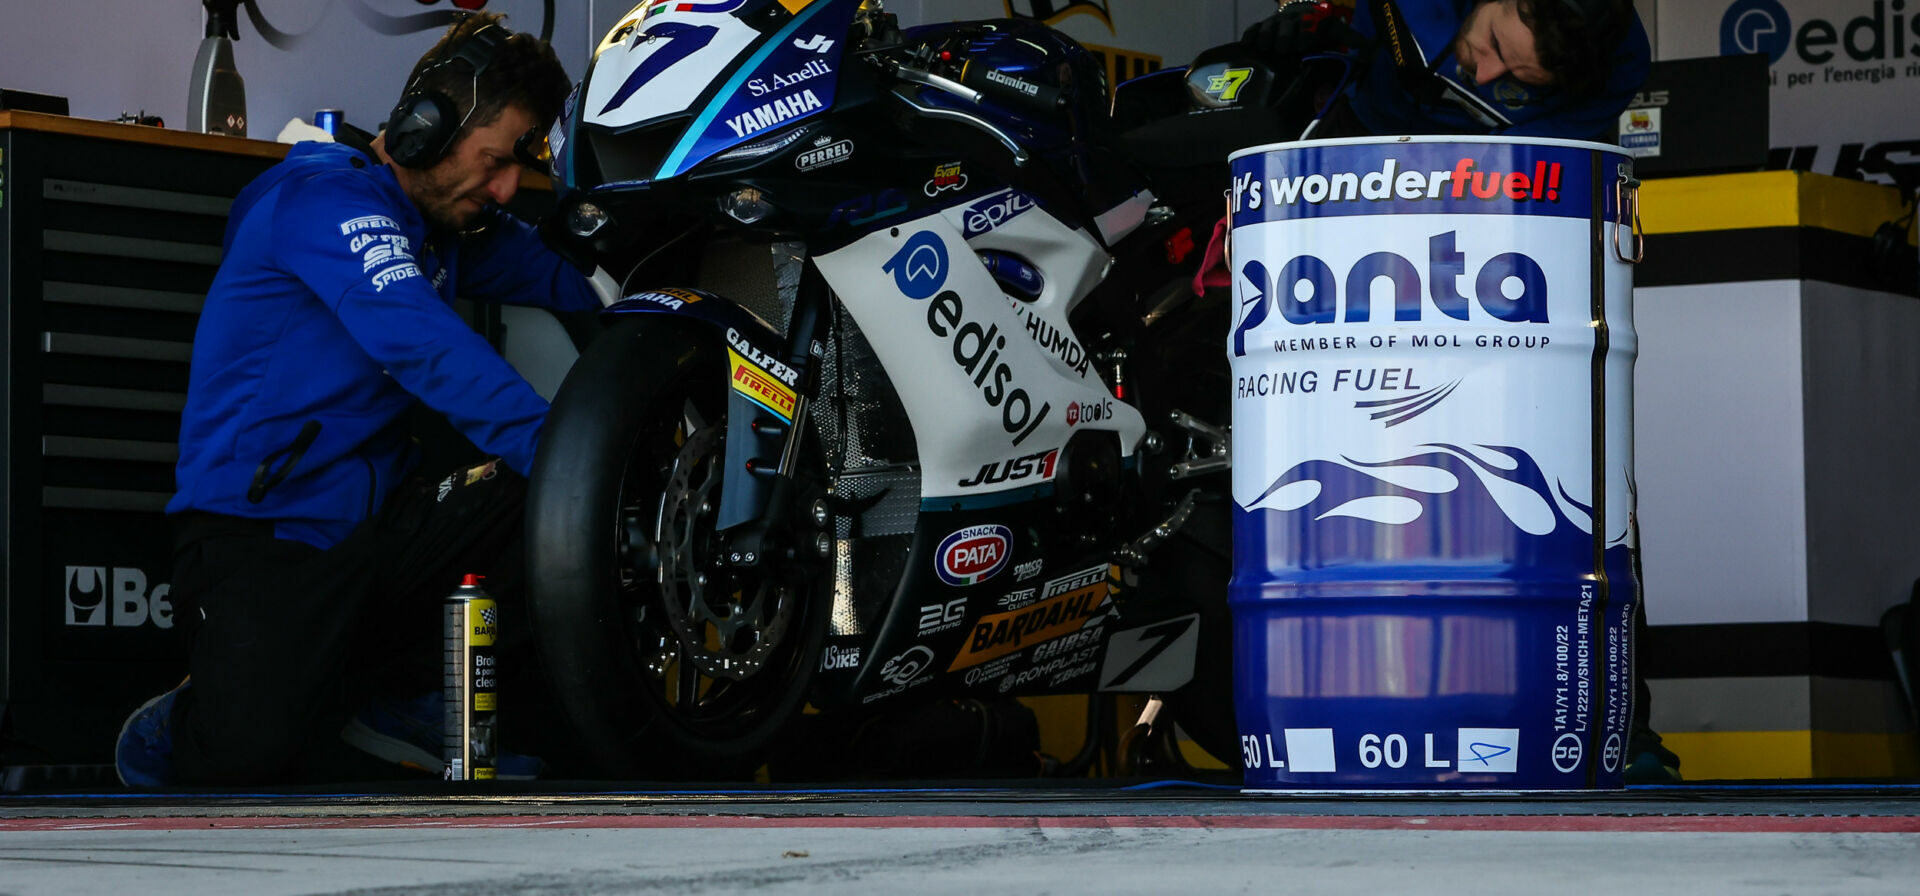 Panta Racing Fuel is the new Official Fuel Supplier of the FIM Supersport World Championship. Photo courtesy Dorna WorldSBK Press Office.